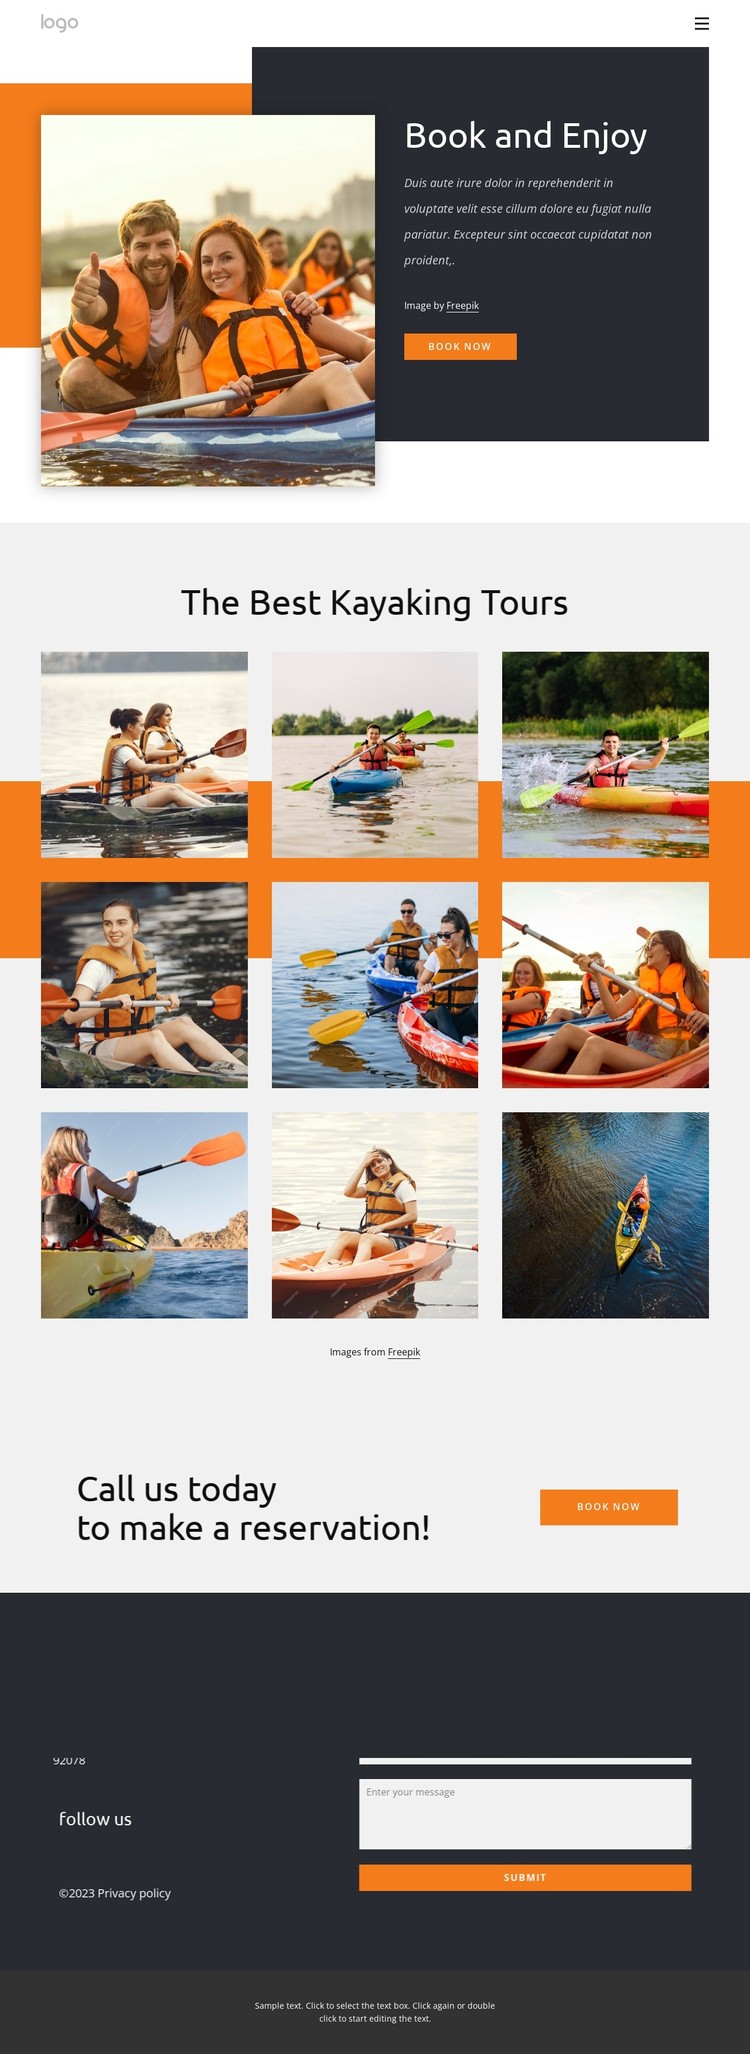 Kayaking tours and holidays Static Site Generator